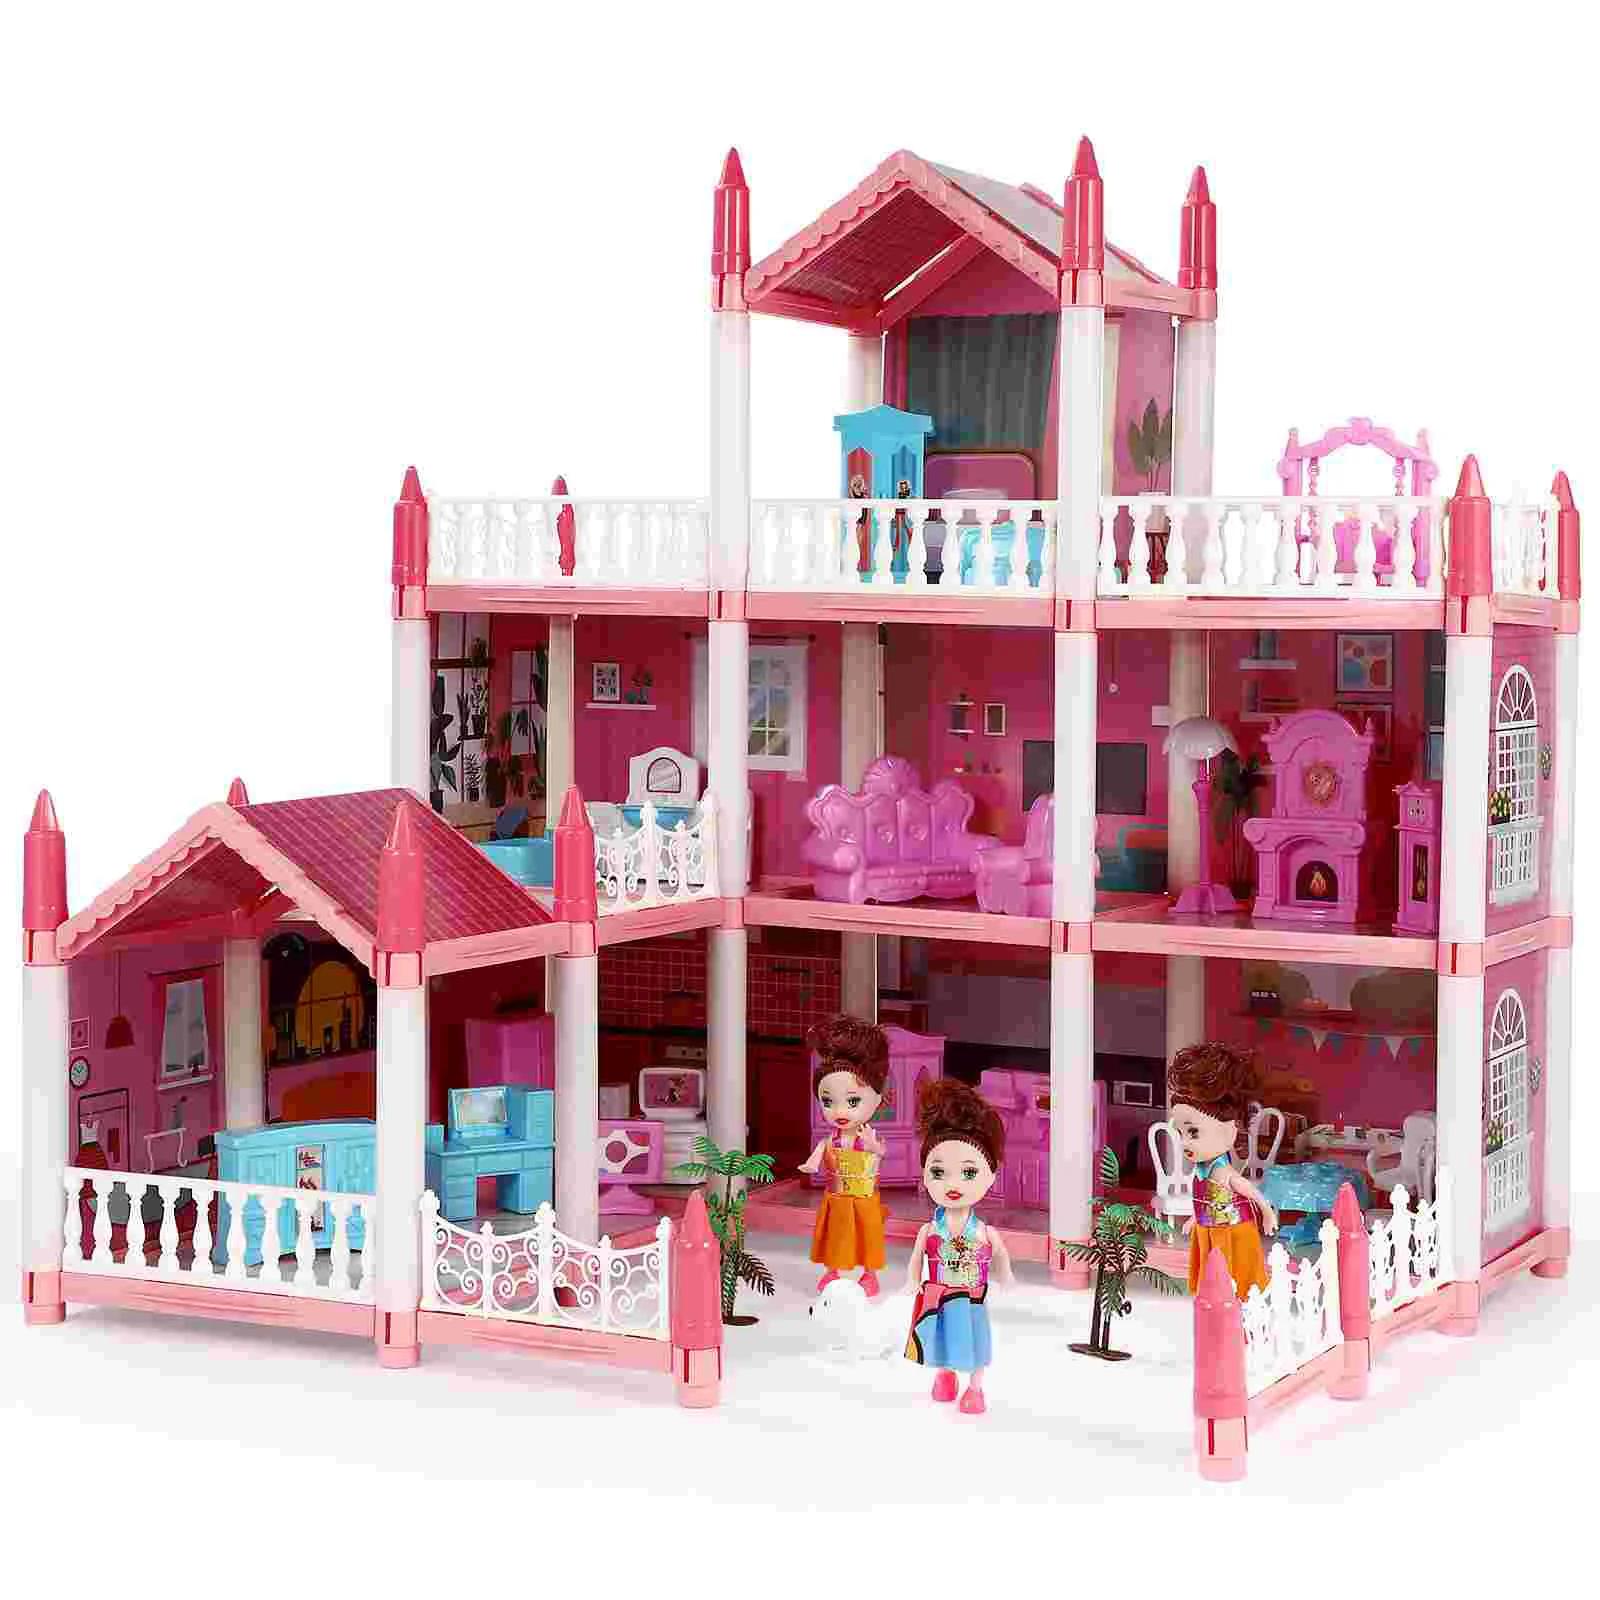 

Princess Room With Furniture House For Girls Toys Accessories 3 Stories Pp Houses Indoor Toddler